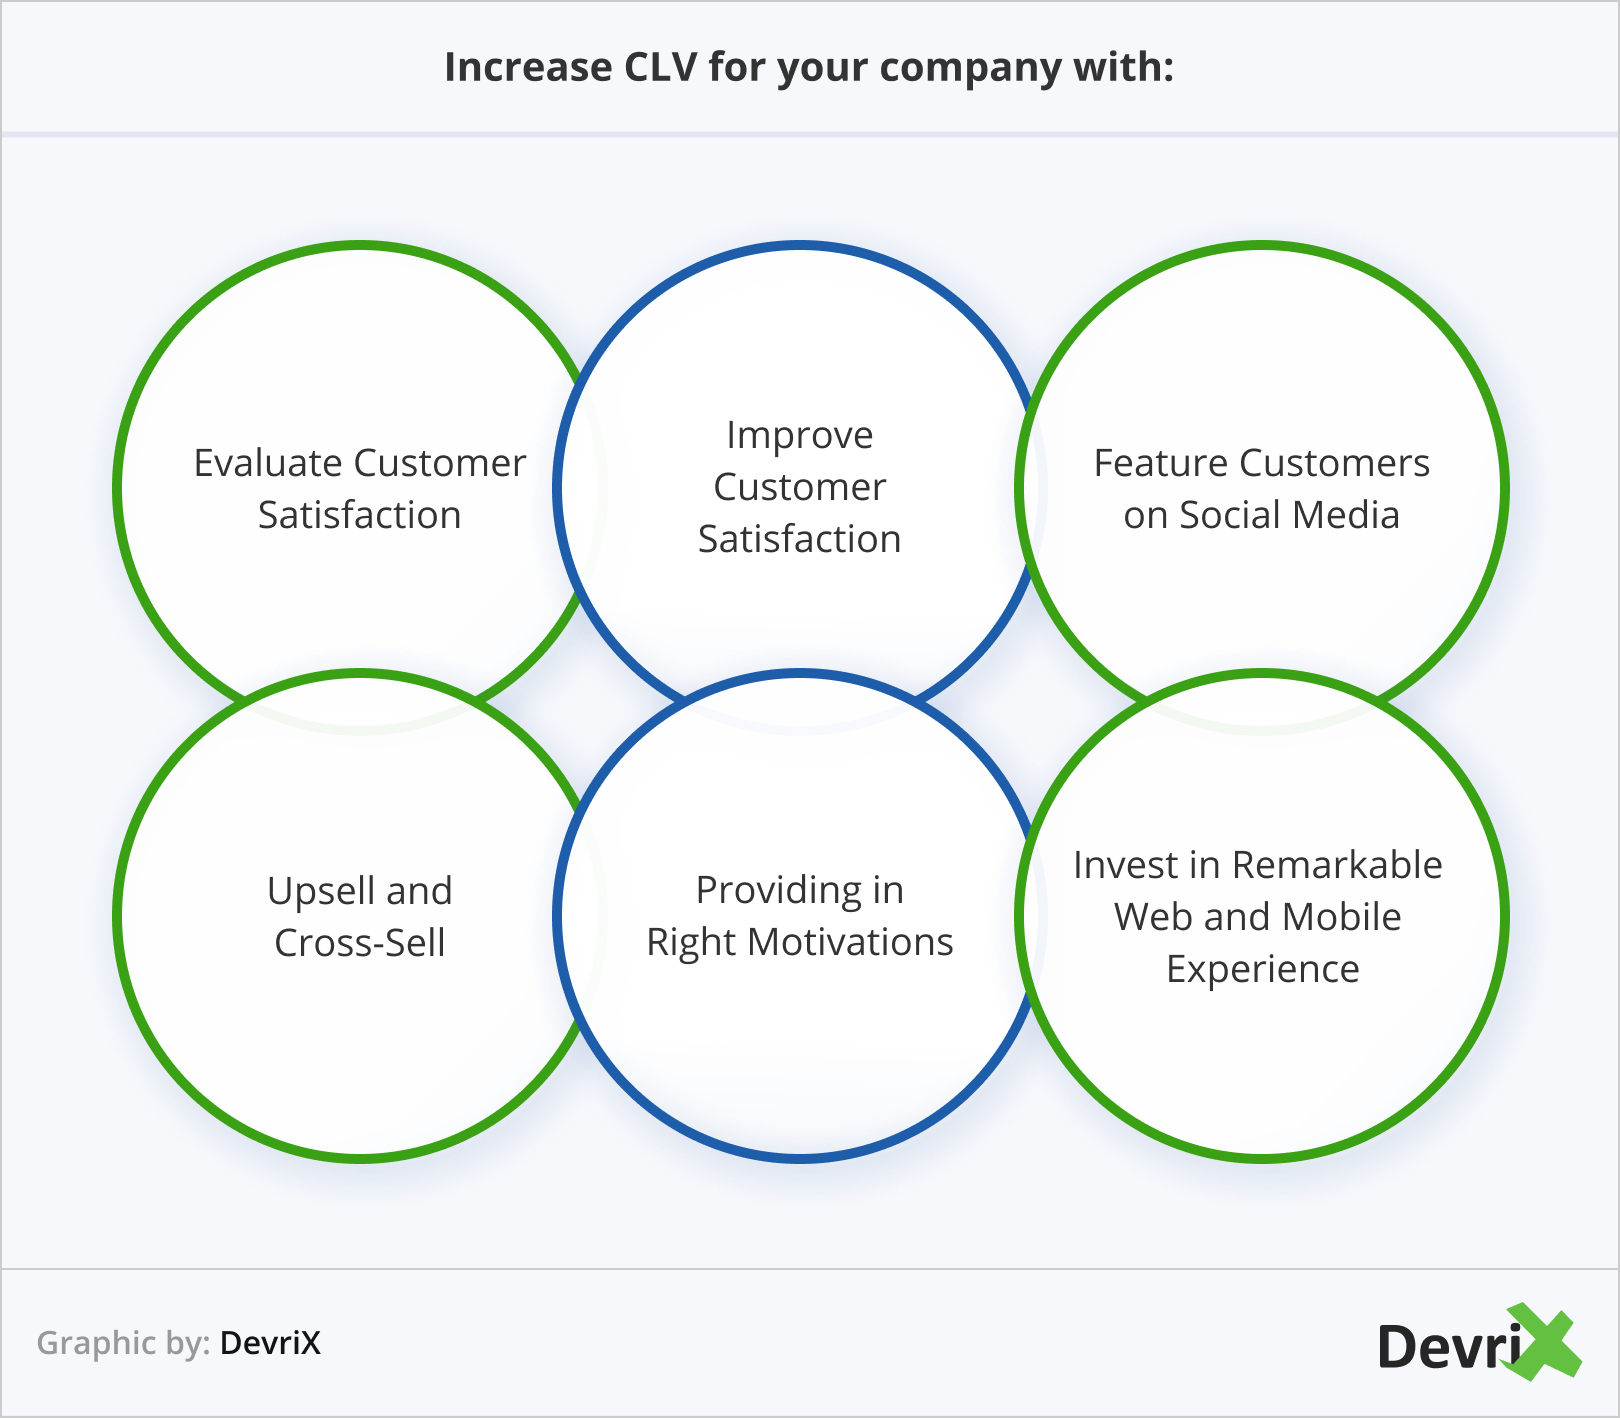 Increase CLV for your company